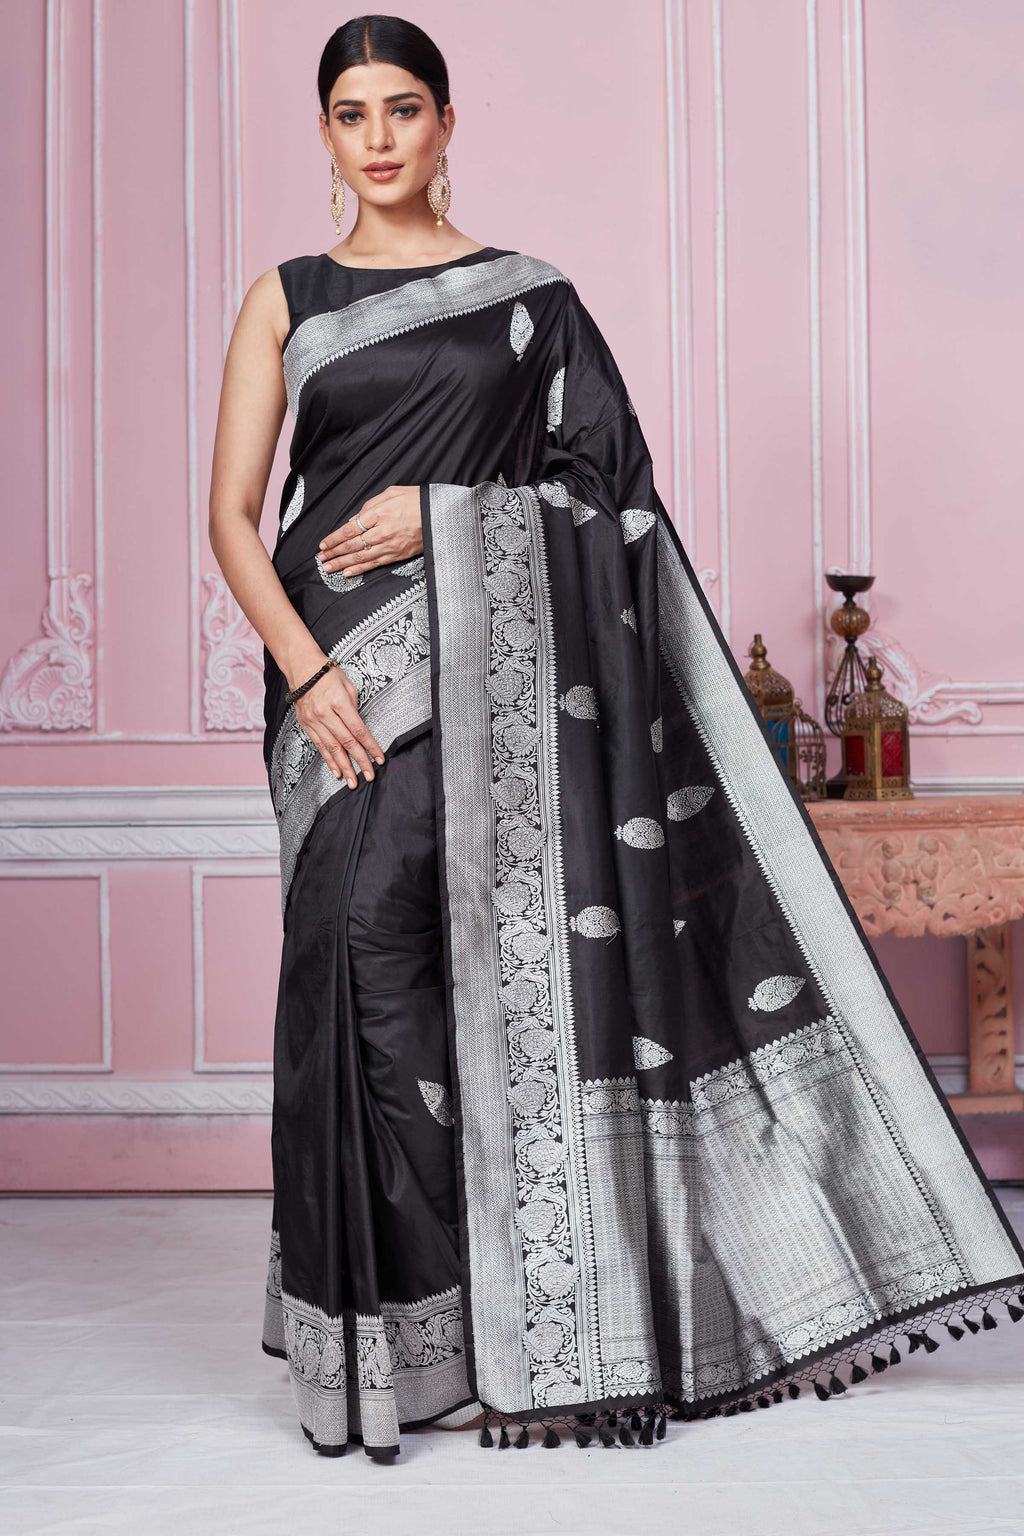 Shop black Banarasi sari online in USA with silver zari border. Look your best on festive occasions in latest designer sarees, pure silk saris, Kanchipuram silk sarees, handwoven sarees, tussar silk saris, embroidered sarees from Pure Elegance Indian fashion store in USA.-full view